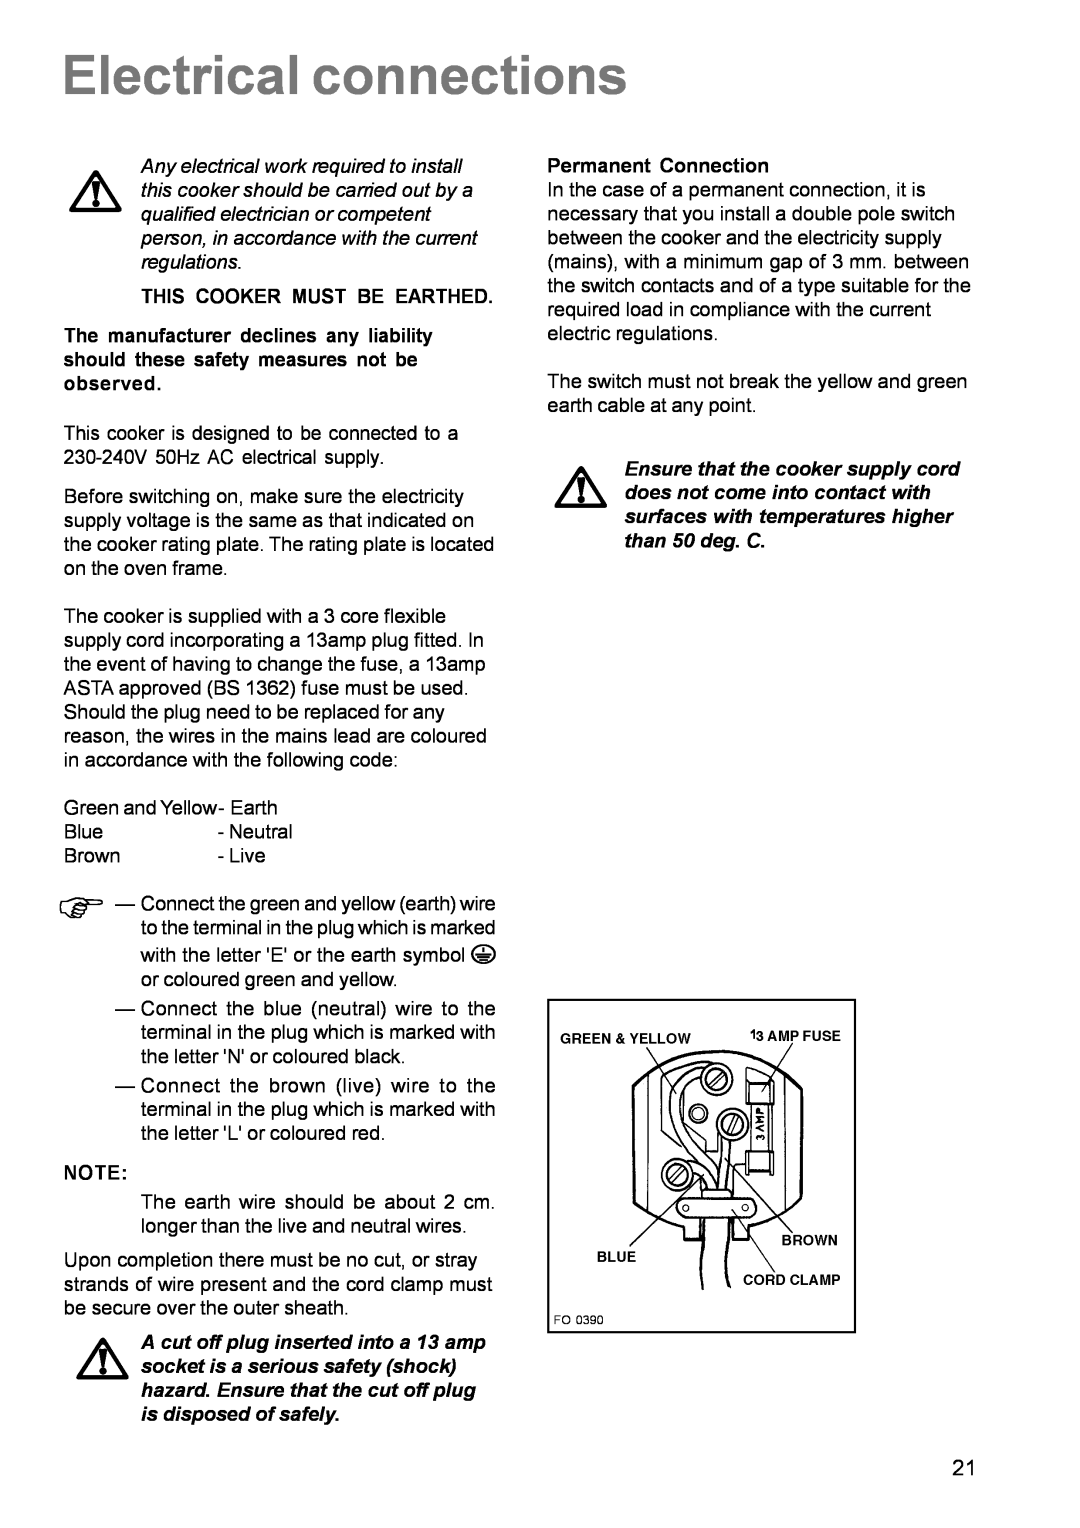 Electrolux EK 5731 manual Electrical connections 